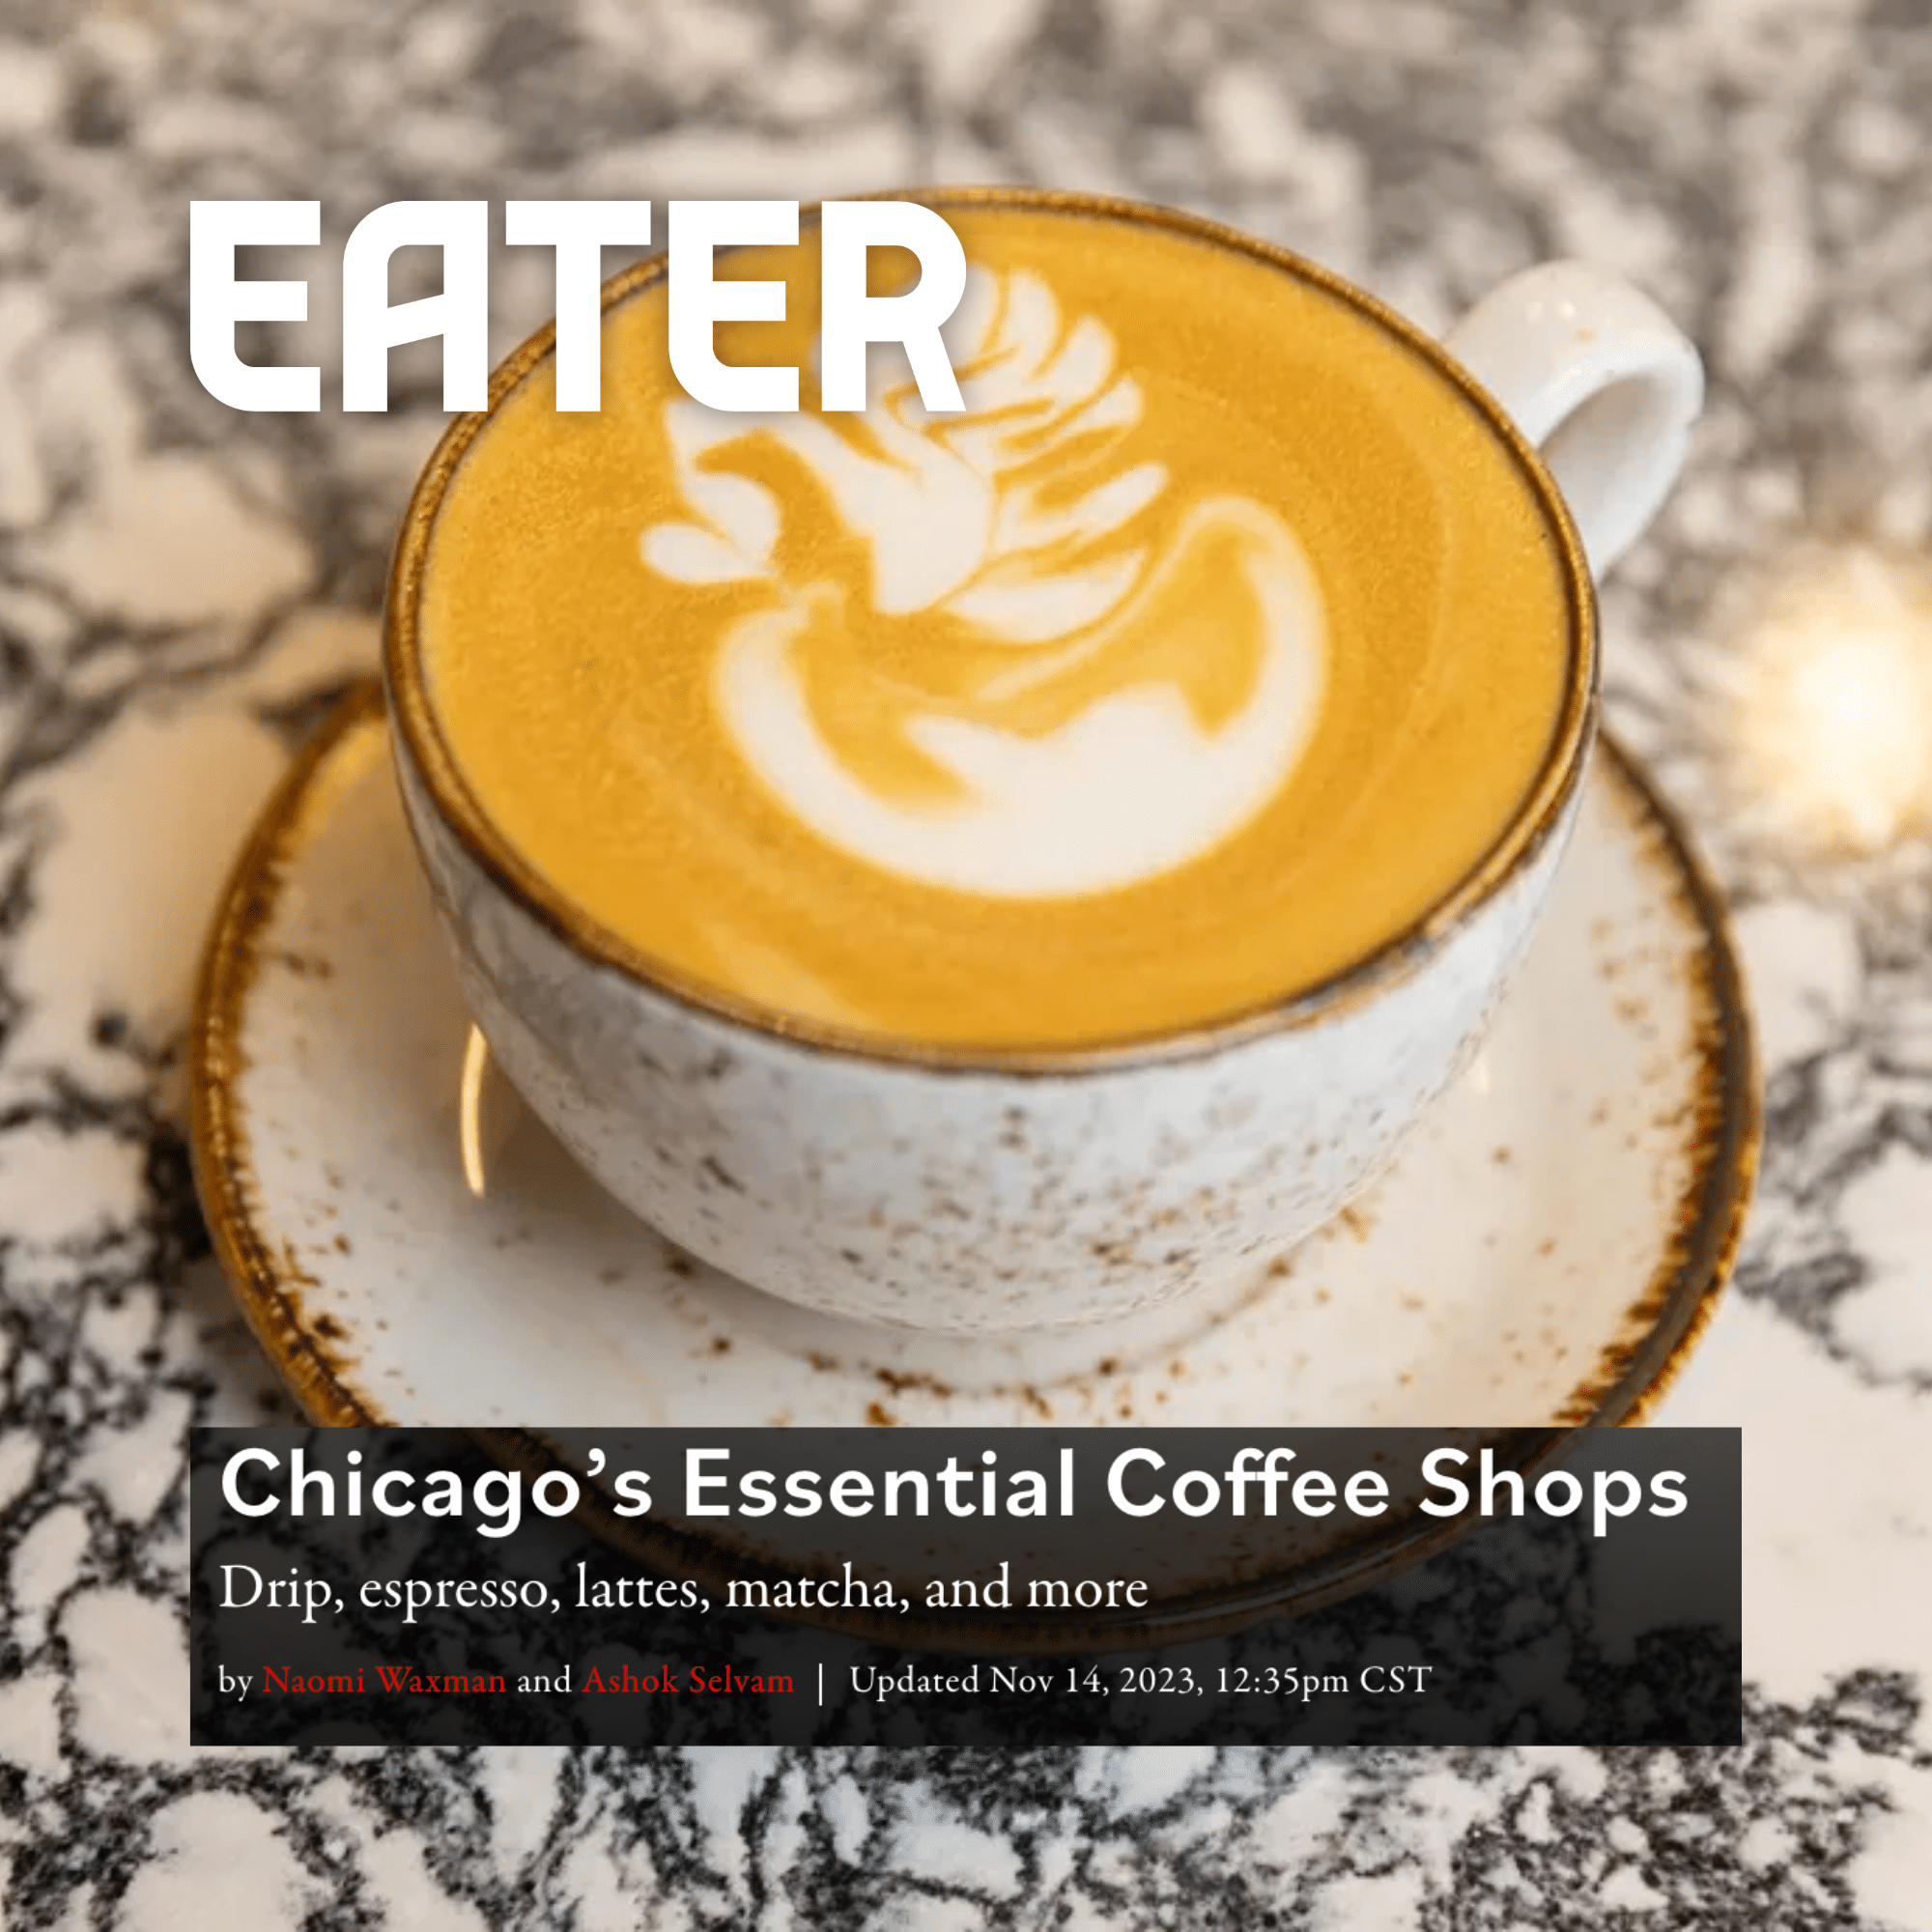 Chicago’s Essential Coffee Shops